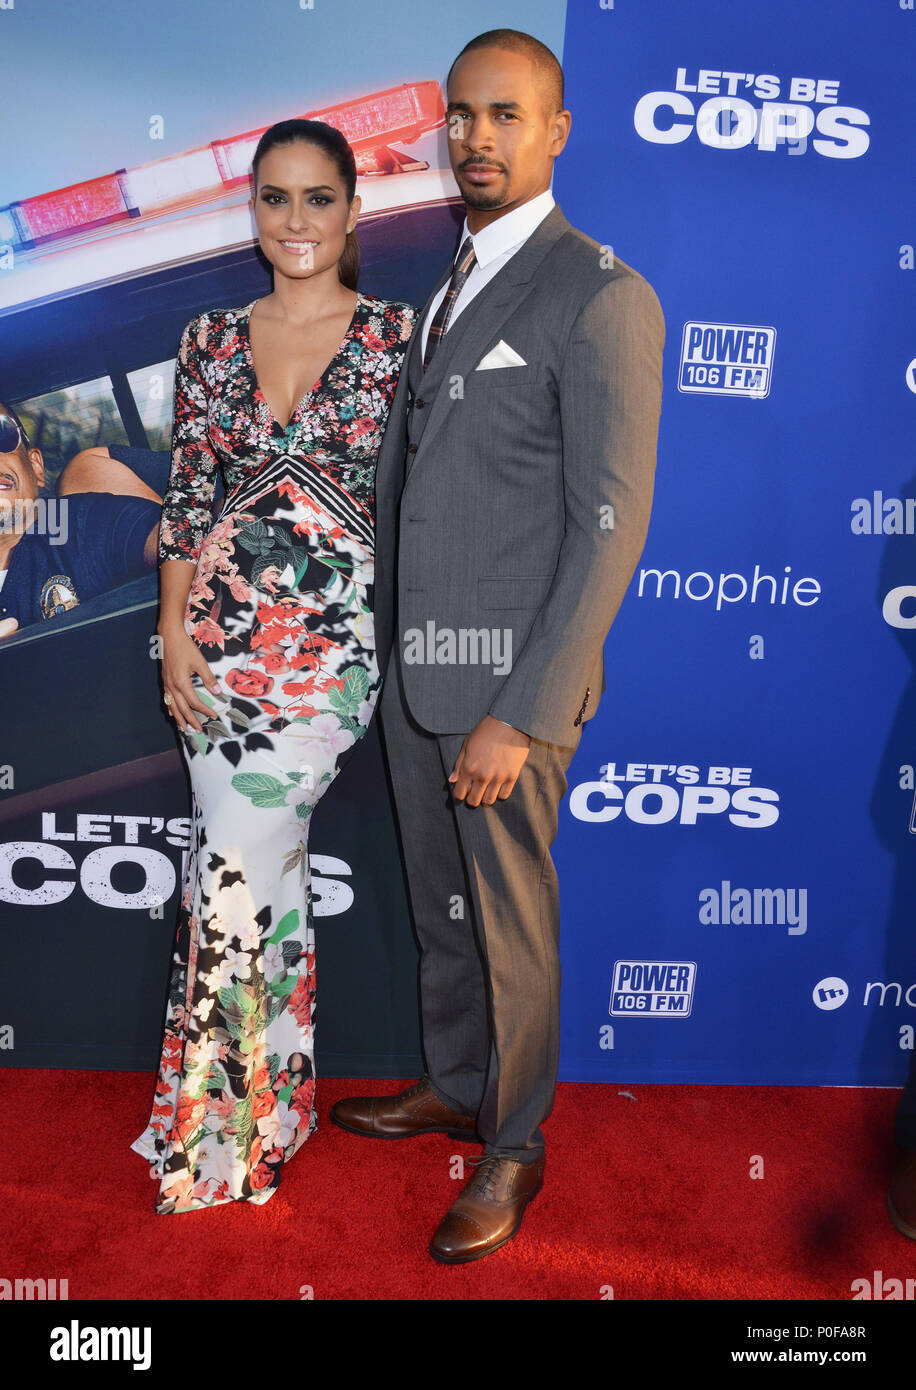 Damon Wayans Jr. and wife Samara Saraiva at the Let s Be Cops premiere at the Arclight Theatre in Los Angeles.a Damon Wayans Jr. and wife Samara Saraiva 128 ------------- Red Carpet Event, Vertical, USA, Film Industry, Celebrities,  Photography, Bestof, Arts Culture and Entertainment, Topix Celebrities fashion /  Vertical, Best of, Event in Hollywood Life - California,  Red Carpet and backstage, USA, Film Industry, Celebrities,  movie celebrities, TV celebrities, Music celebrities, Photography, Bestof, Arts Culture and Entertainment,  Topix, vertical,  family from from the year , 2014, inquiry Stock Photo